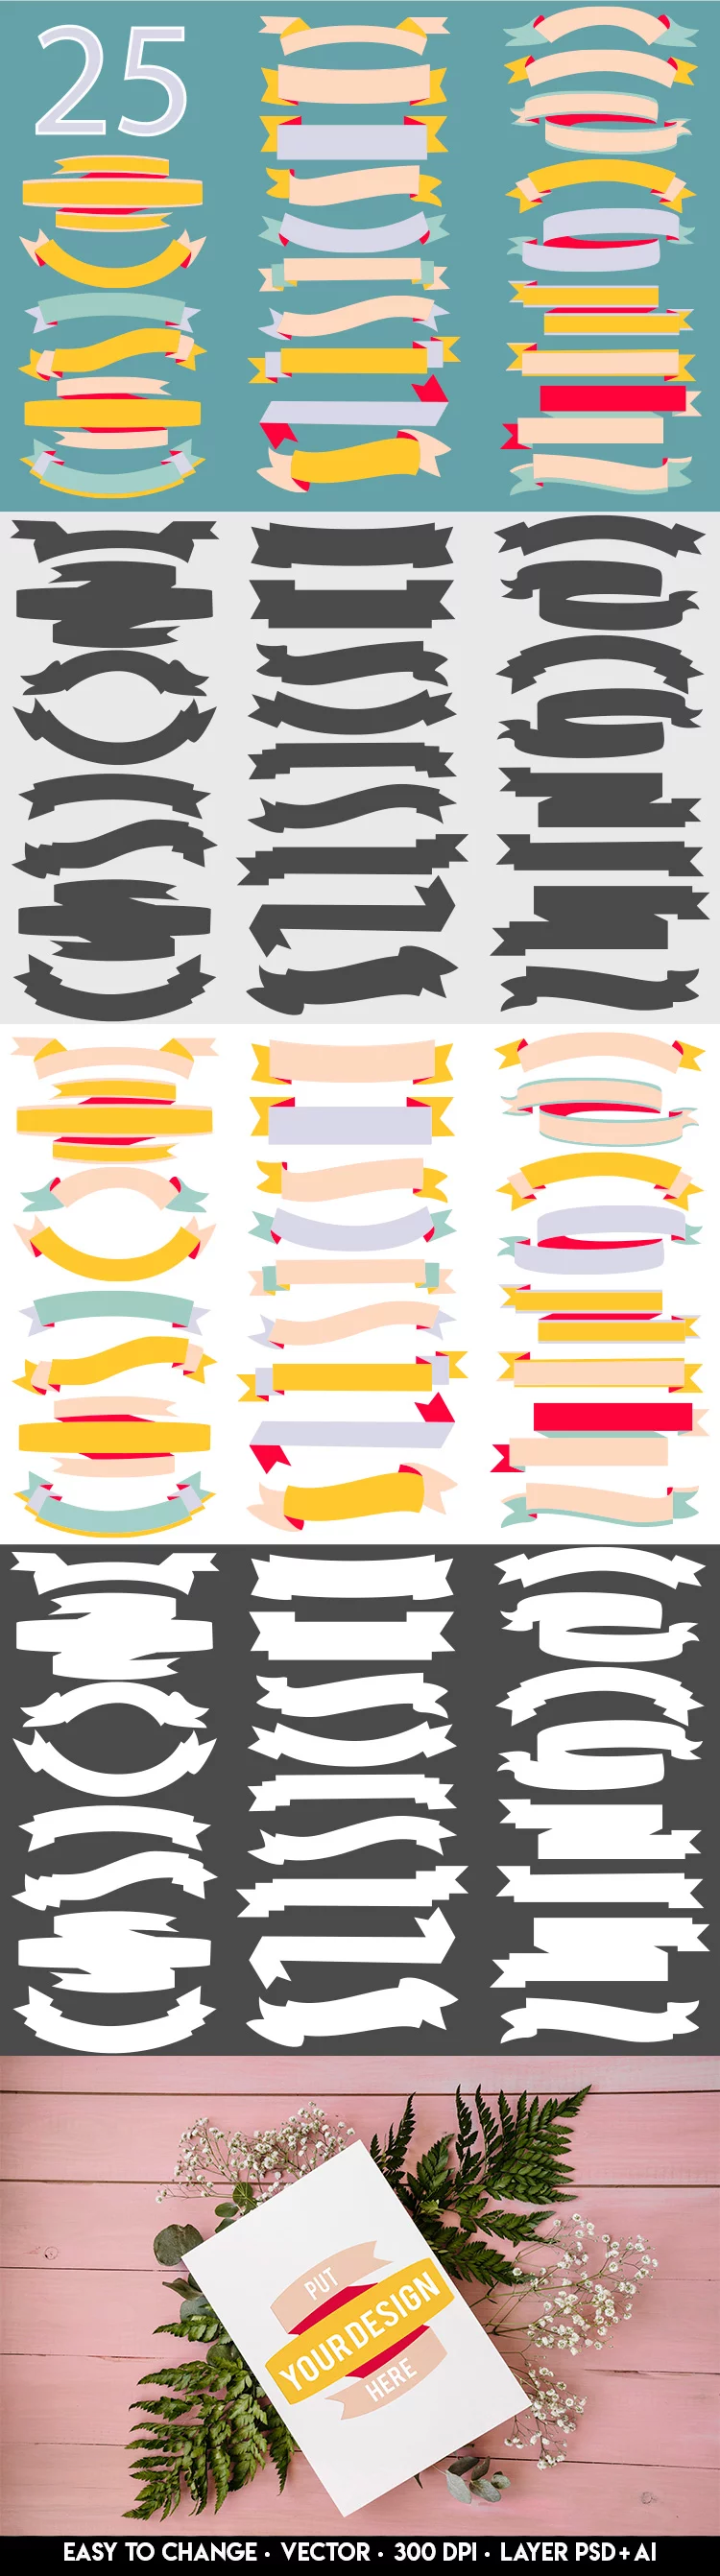 Free Ribbon And Banners Vector Collection